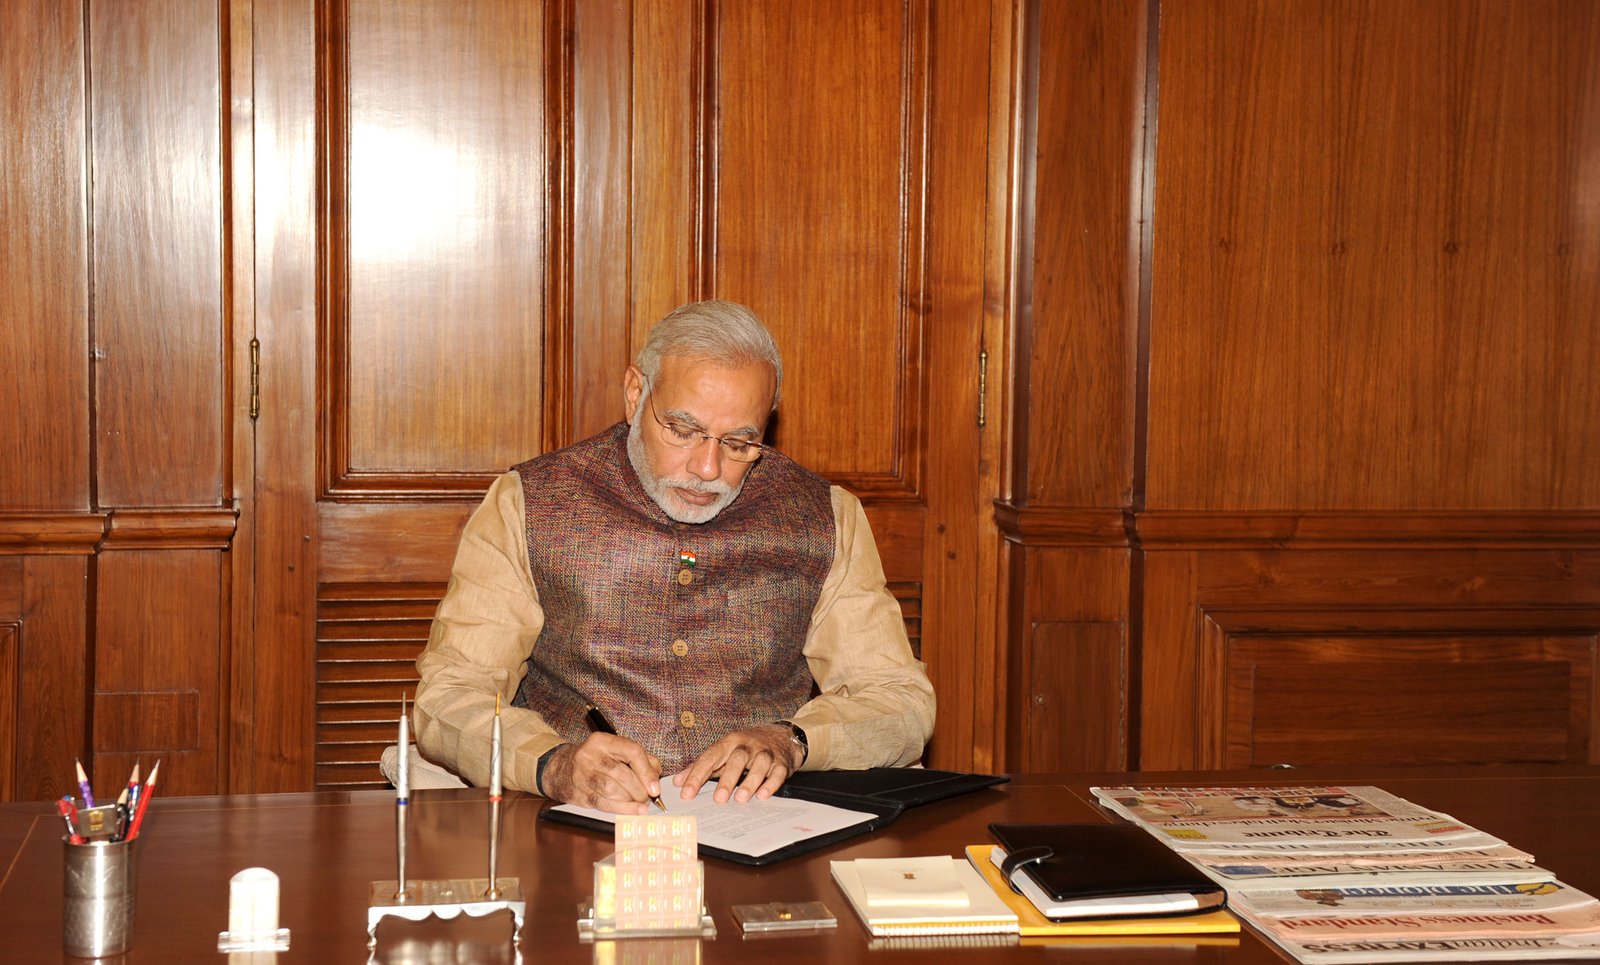 High Expectations! The prime minister of India, Mr Narendra Modi taking charge of his office on May 27, 2014.